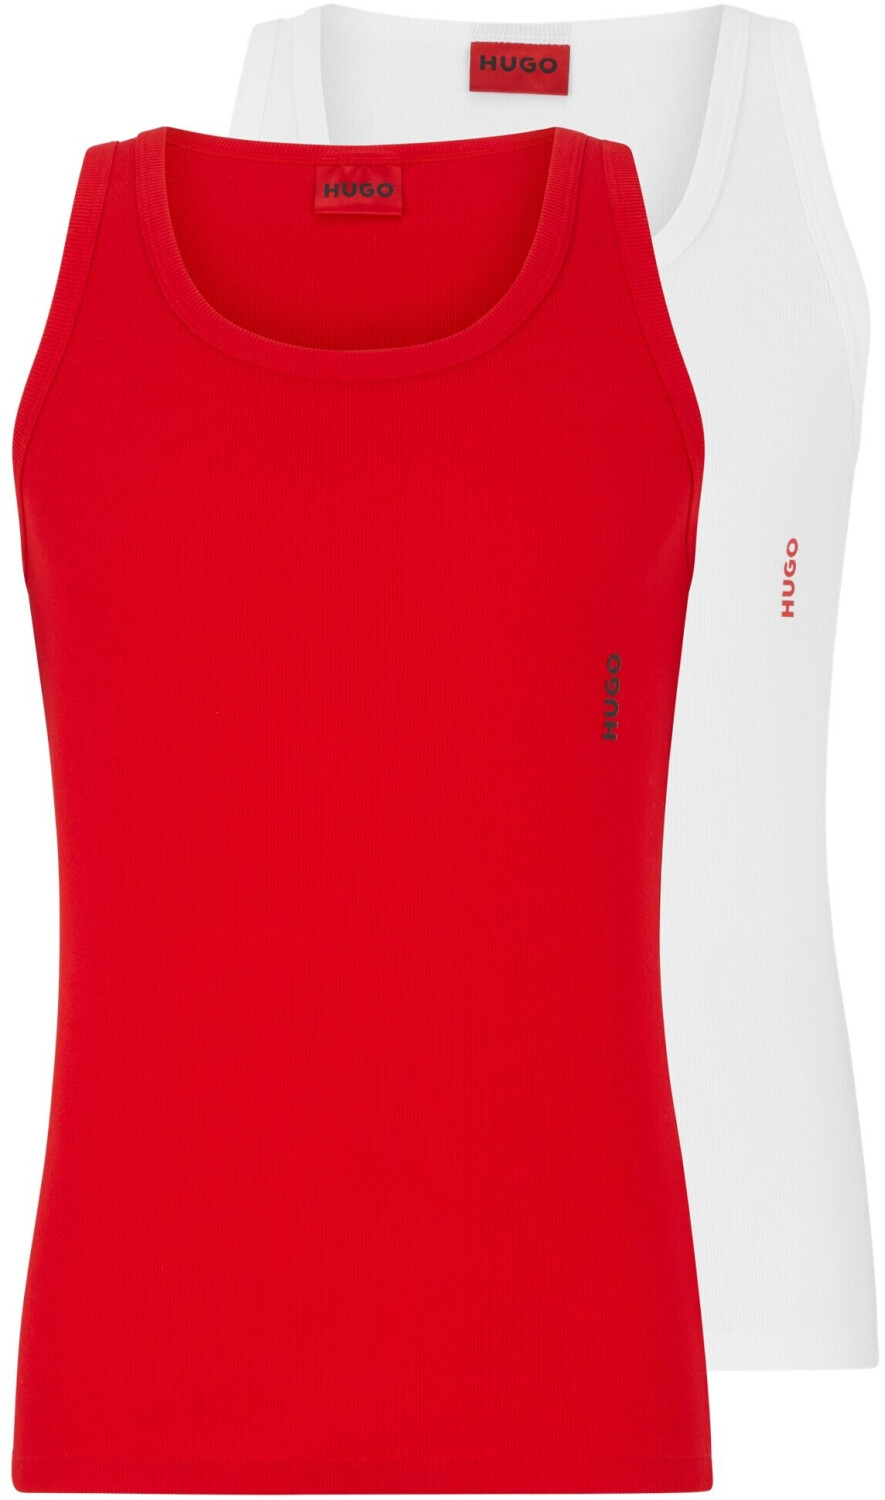 Buy Hugo TANK TOP TWIN Deals on from (Today) £29.00 (50469790) – PACK Best